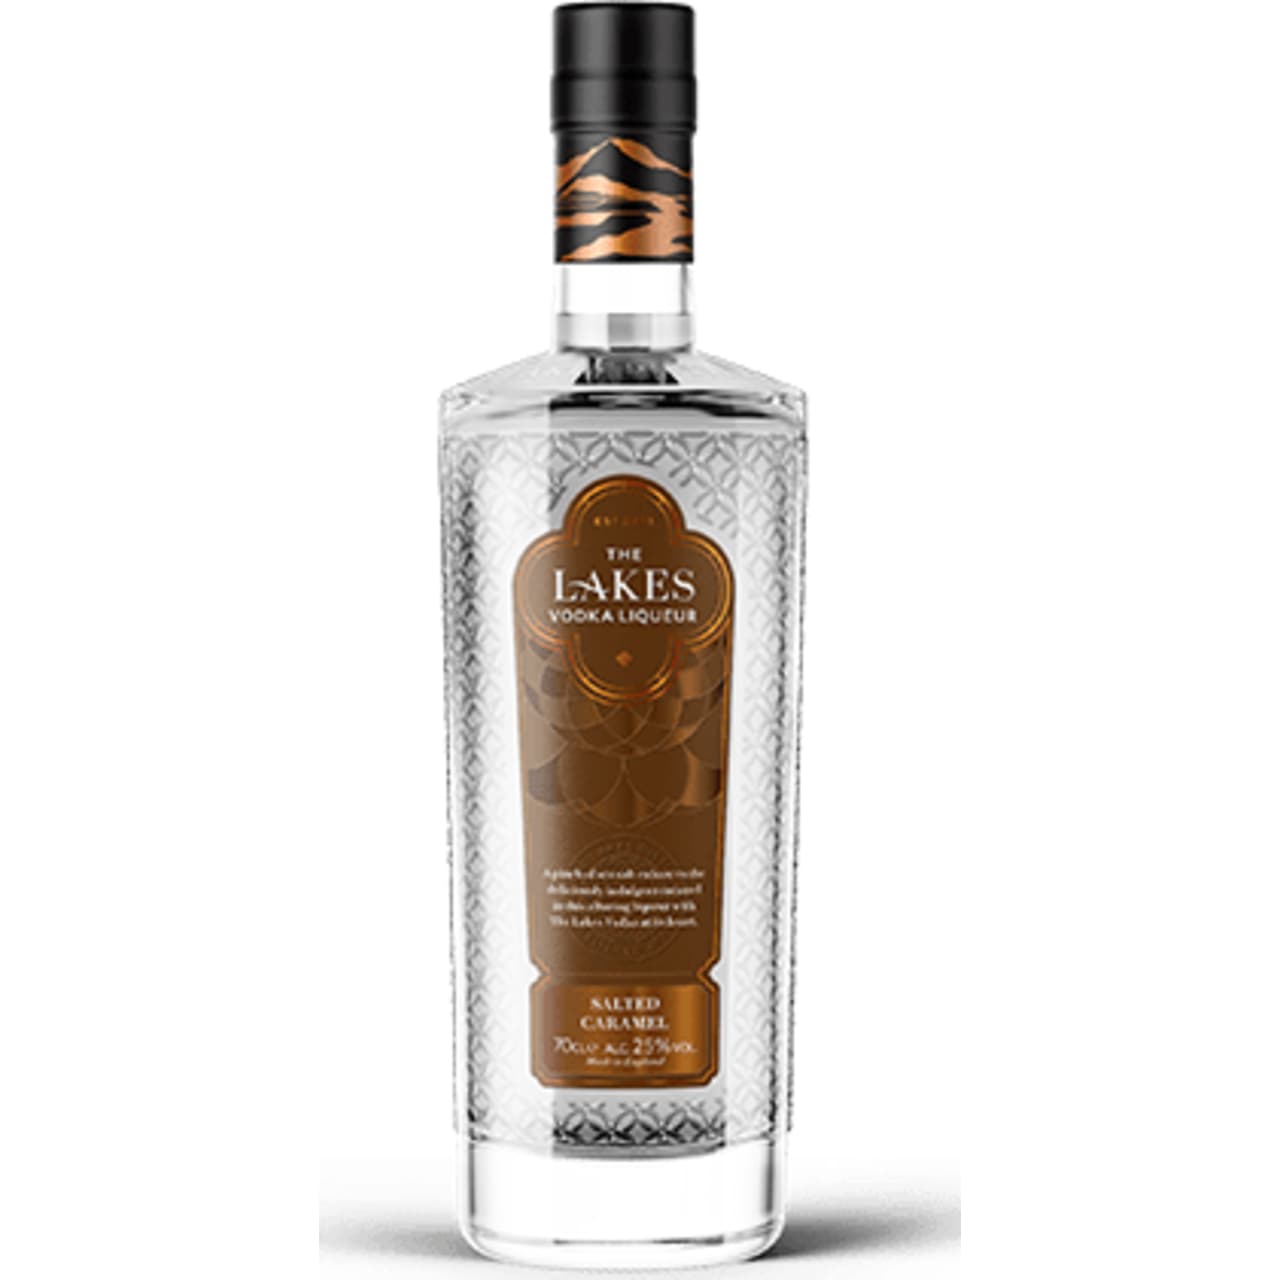 Velvety smooth and decadent, intricate flavour infusion creates a soothingly deluxe vodka liqueur for a comforting, luxurious experience.